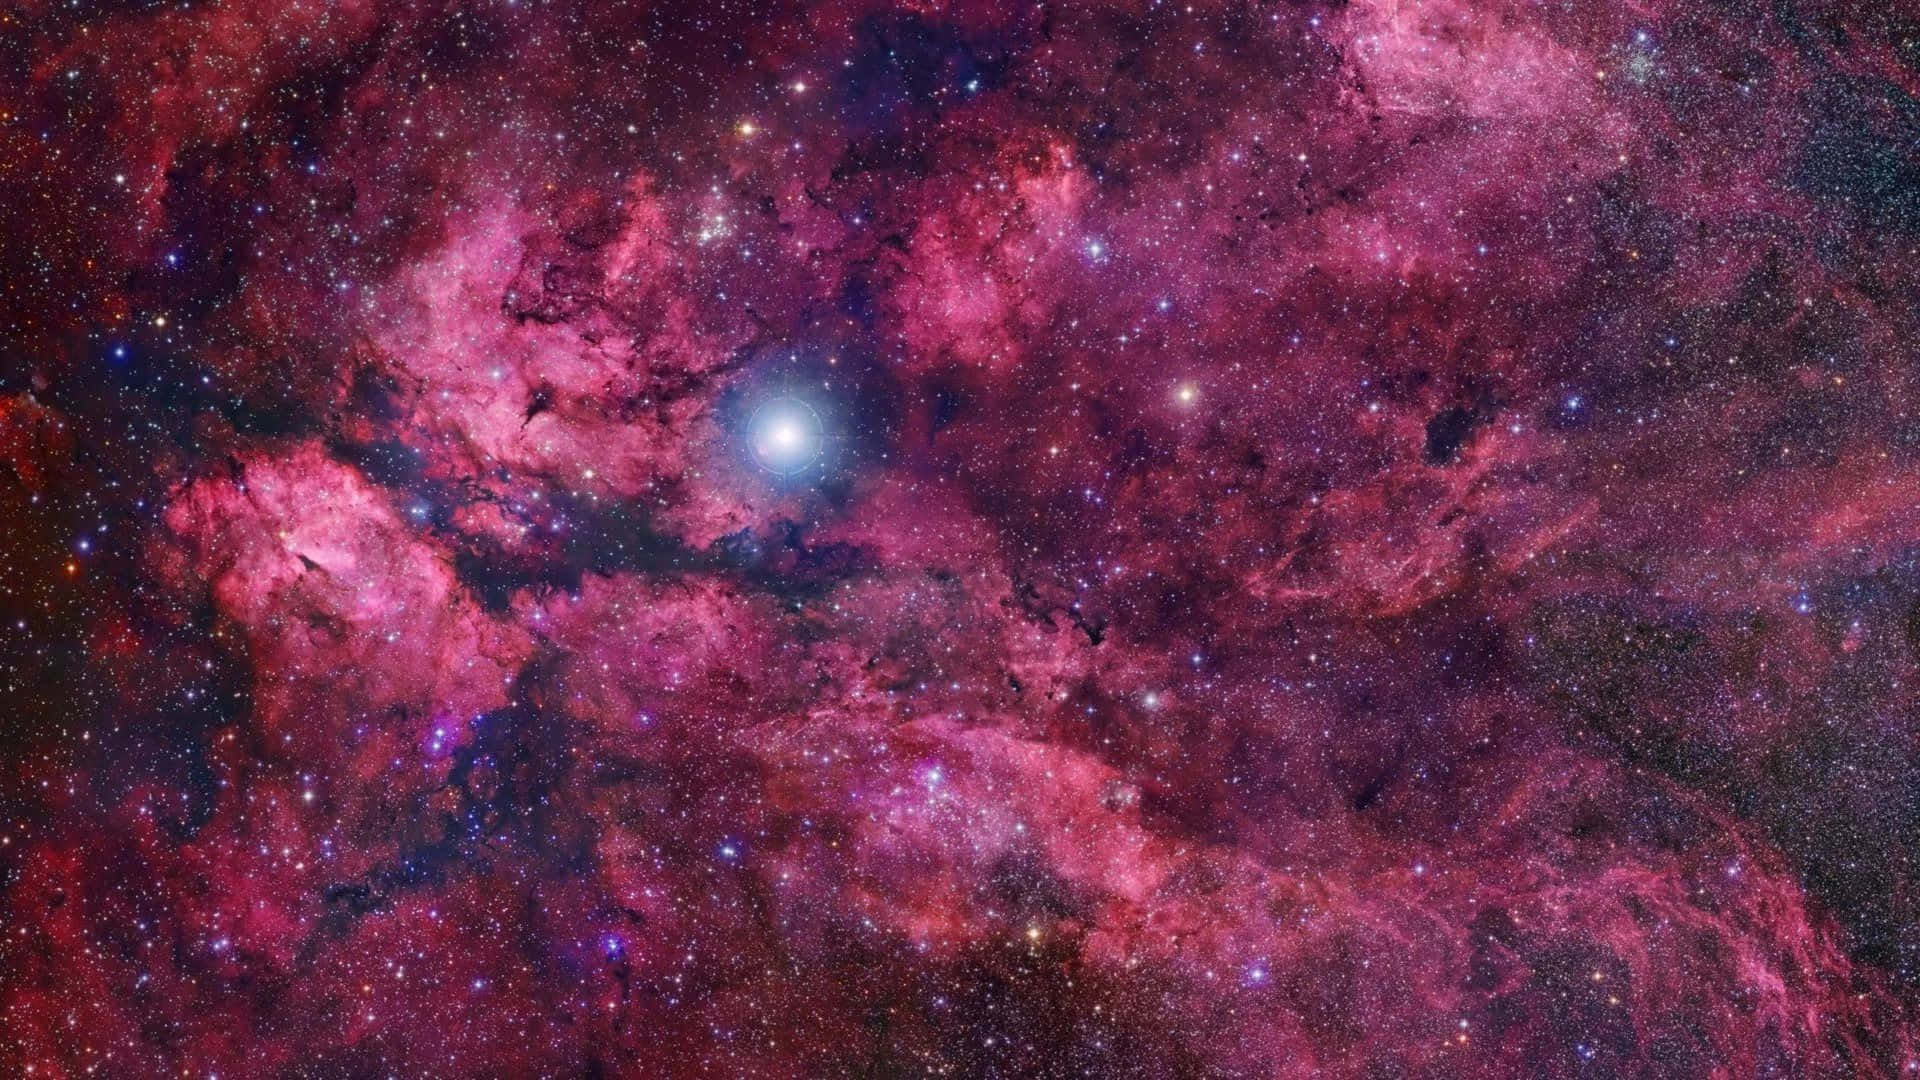 "Explore the Outer Reaches of the Universe with a Pink and Purple Galaxy" Wallpaper